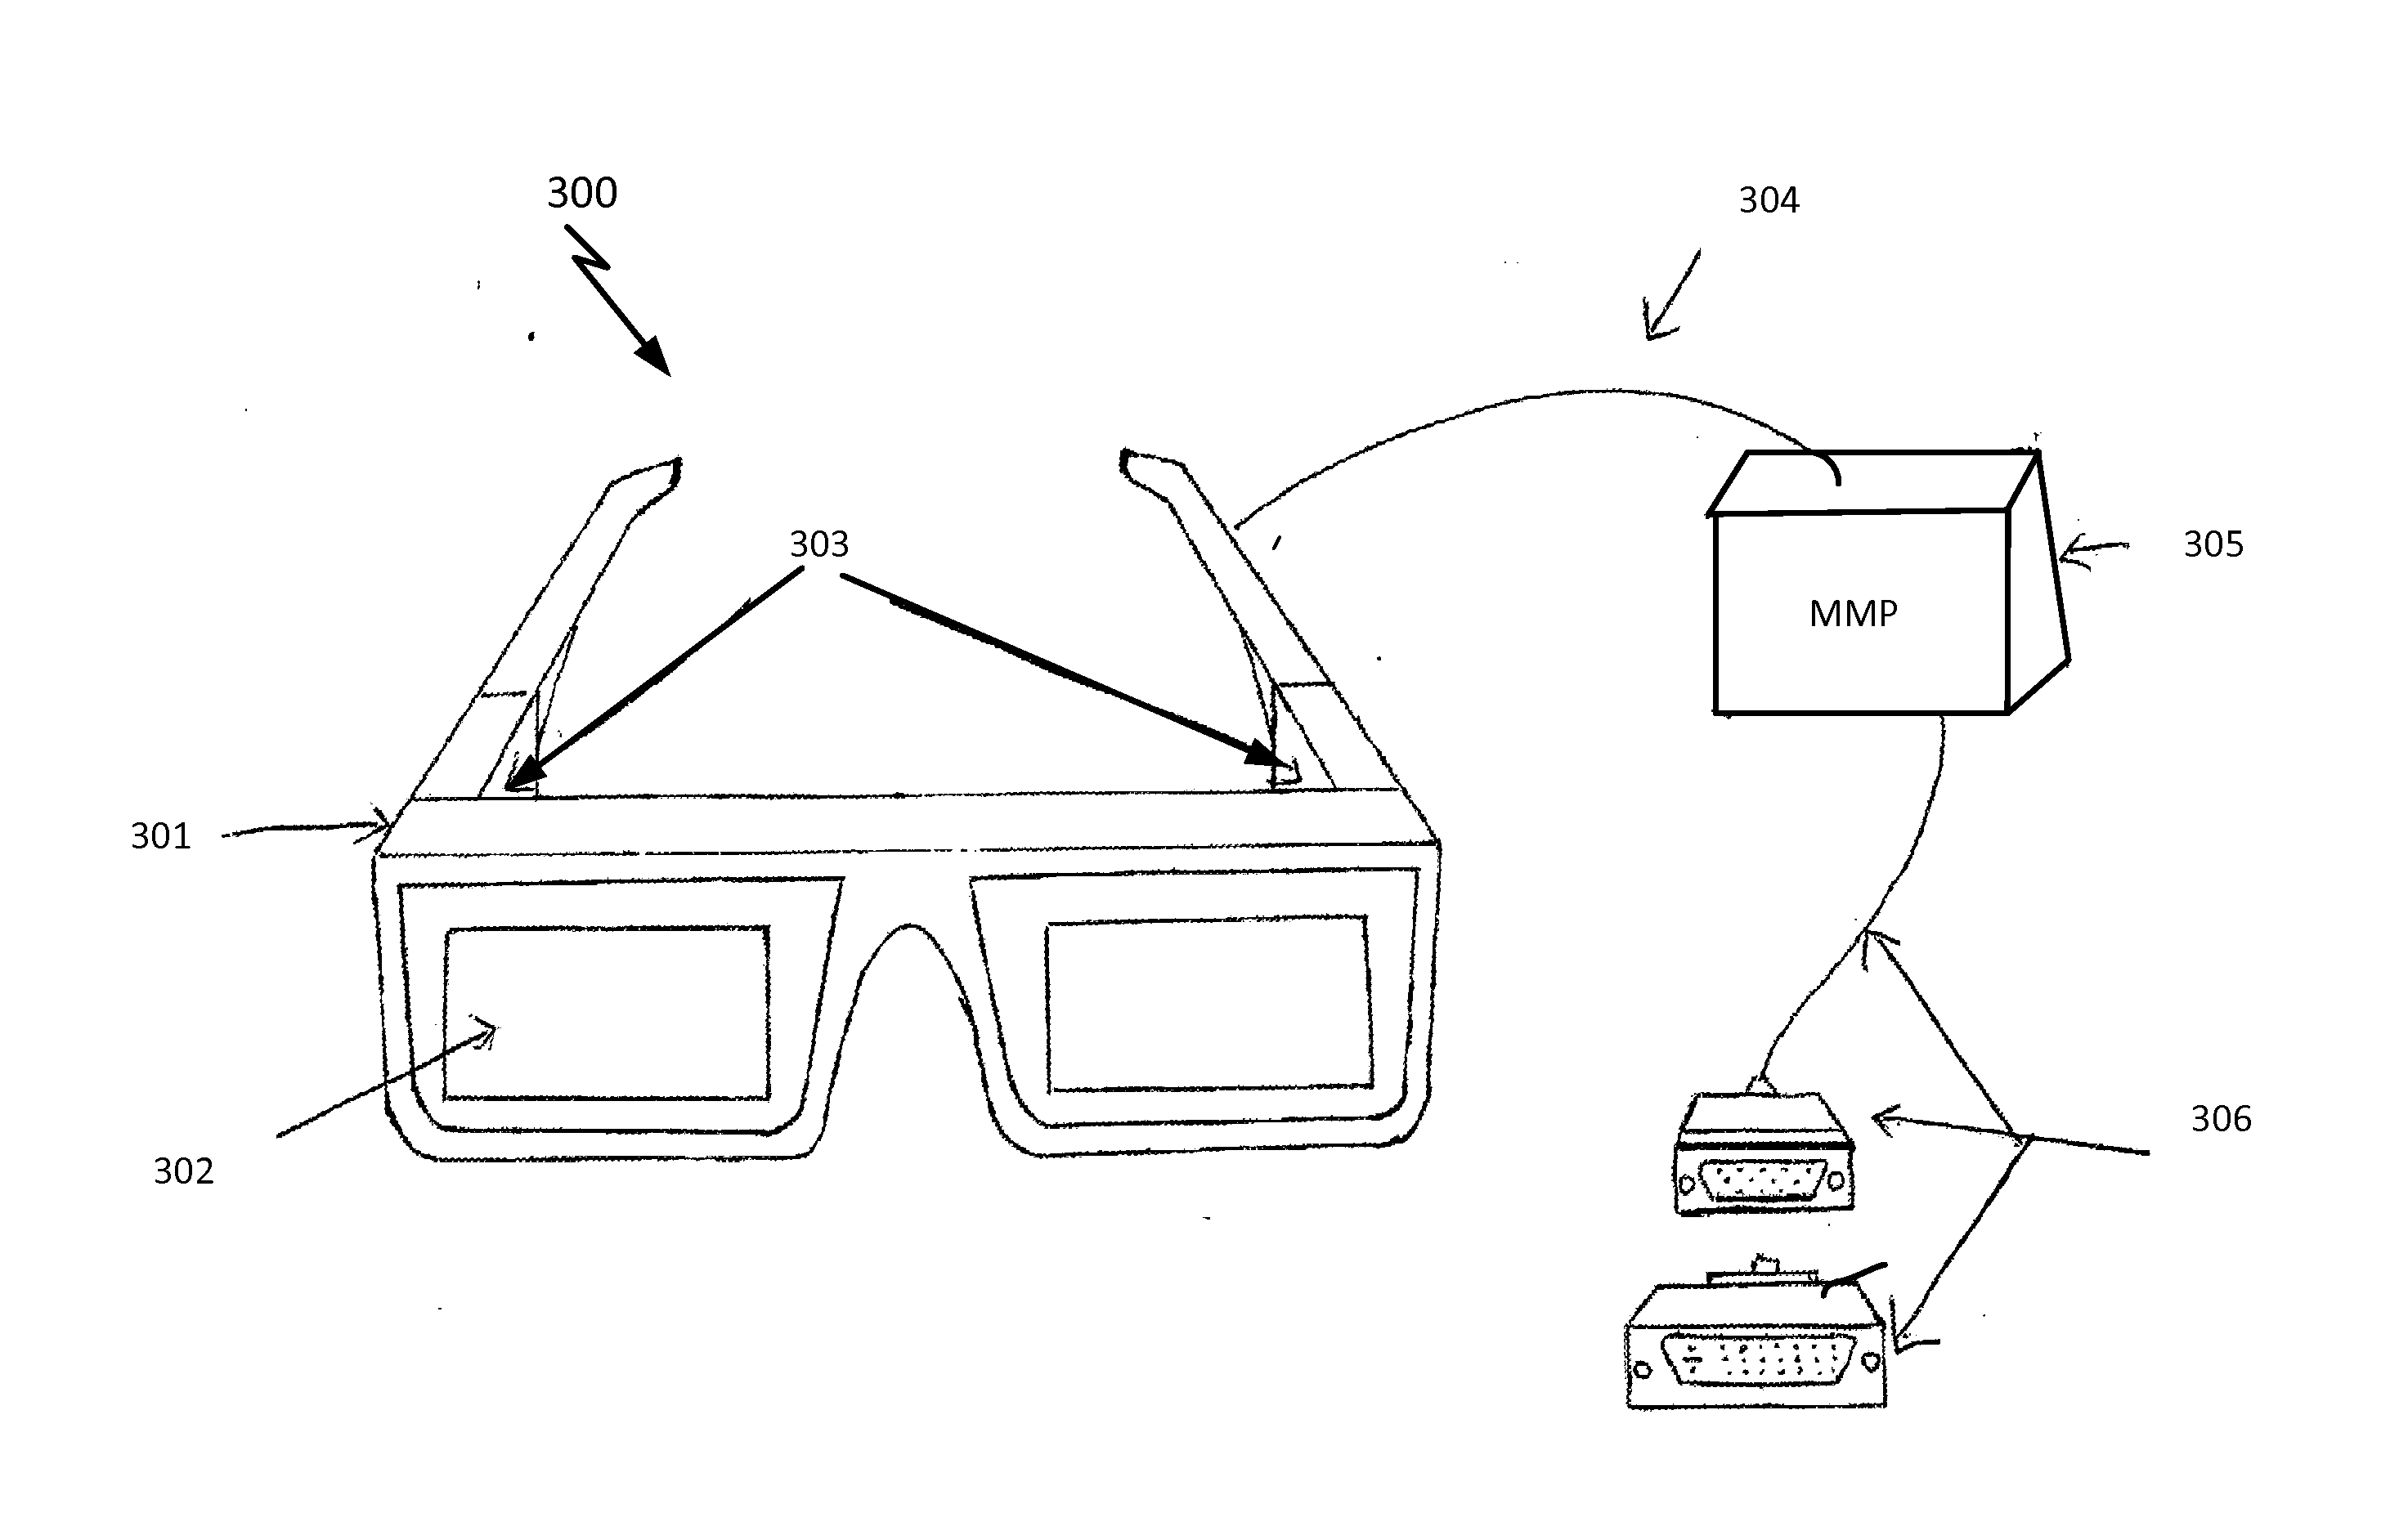 Wearable surgical imaging device with semi-transparent screen